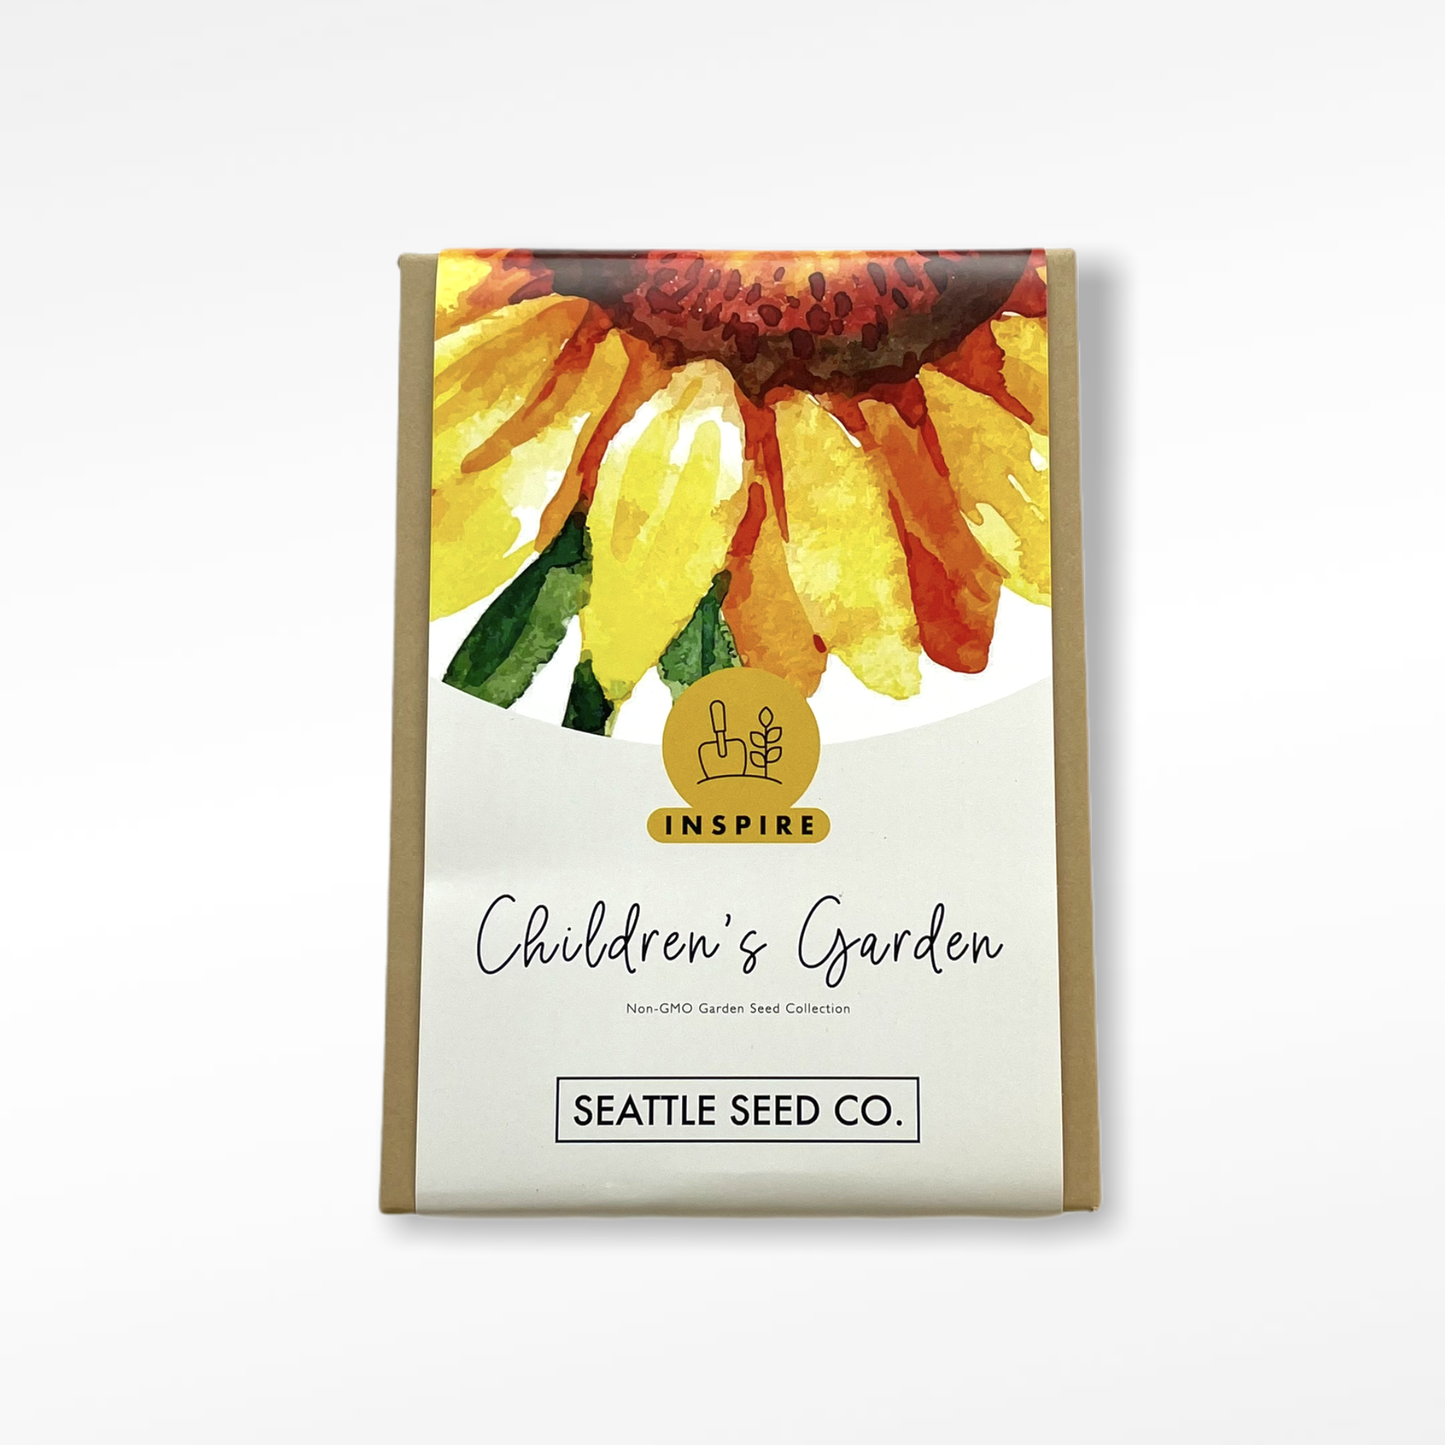 Seattle Seed Co. - Non-GMO Seed Collection - Children's Garden